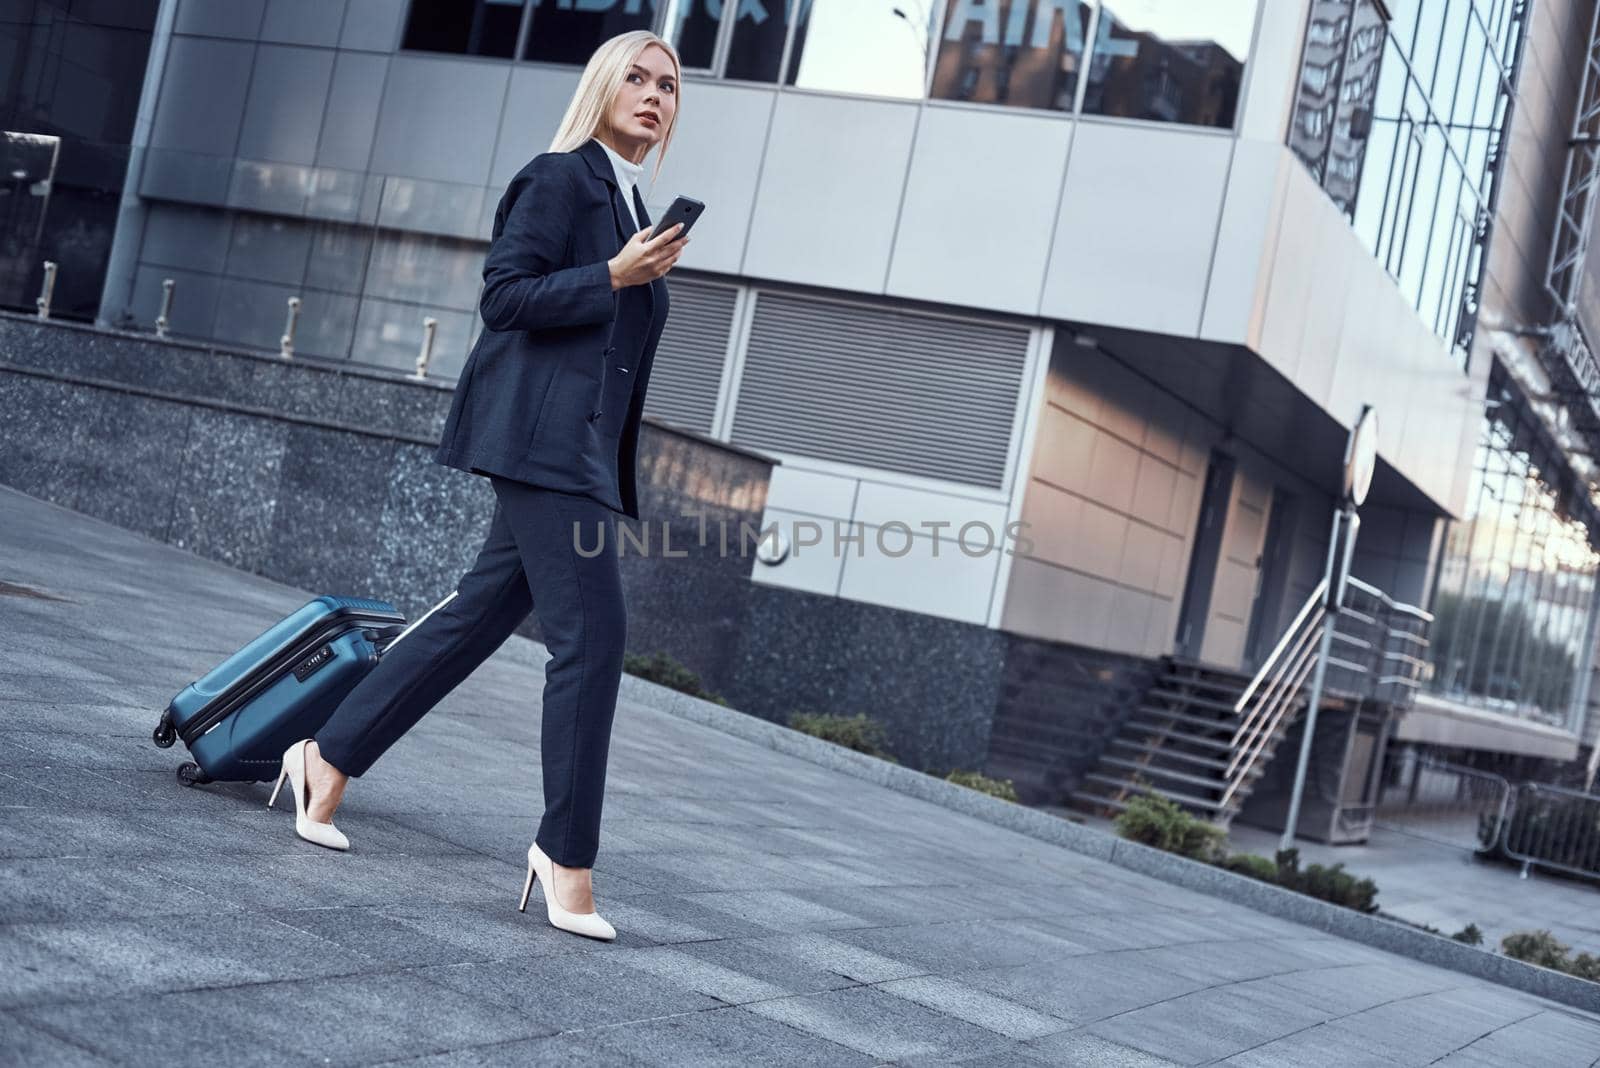 Travel, business trip. People and technology concept - happy young woman with suitcase by friendsstock